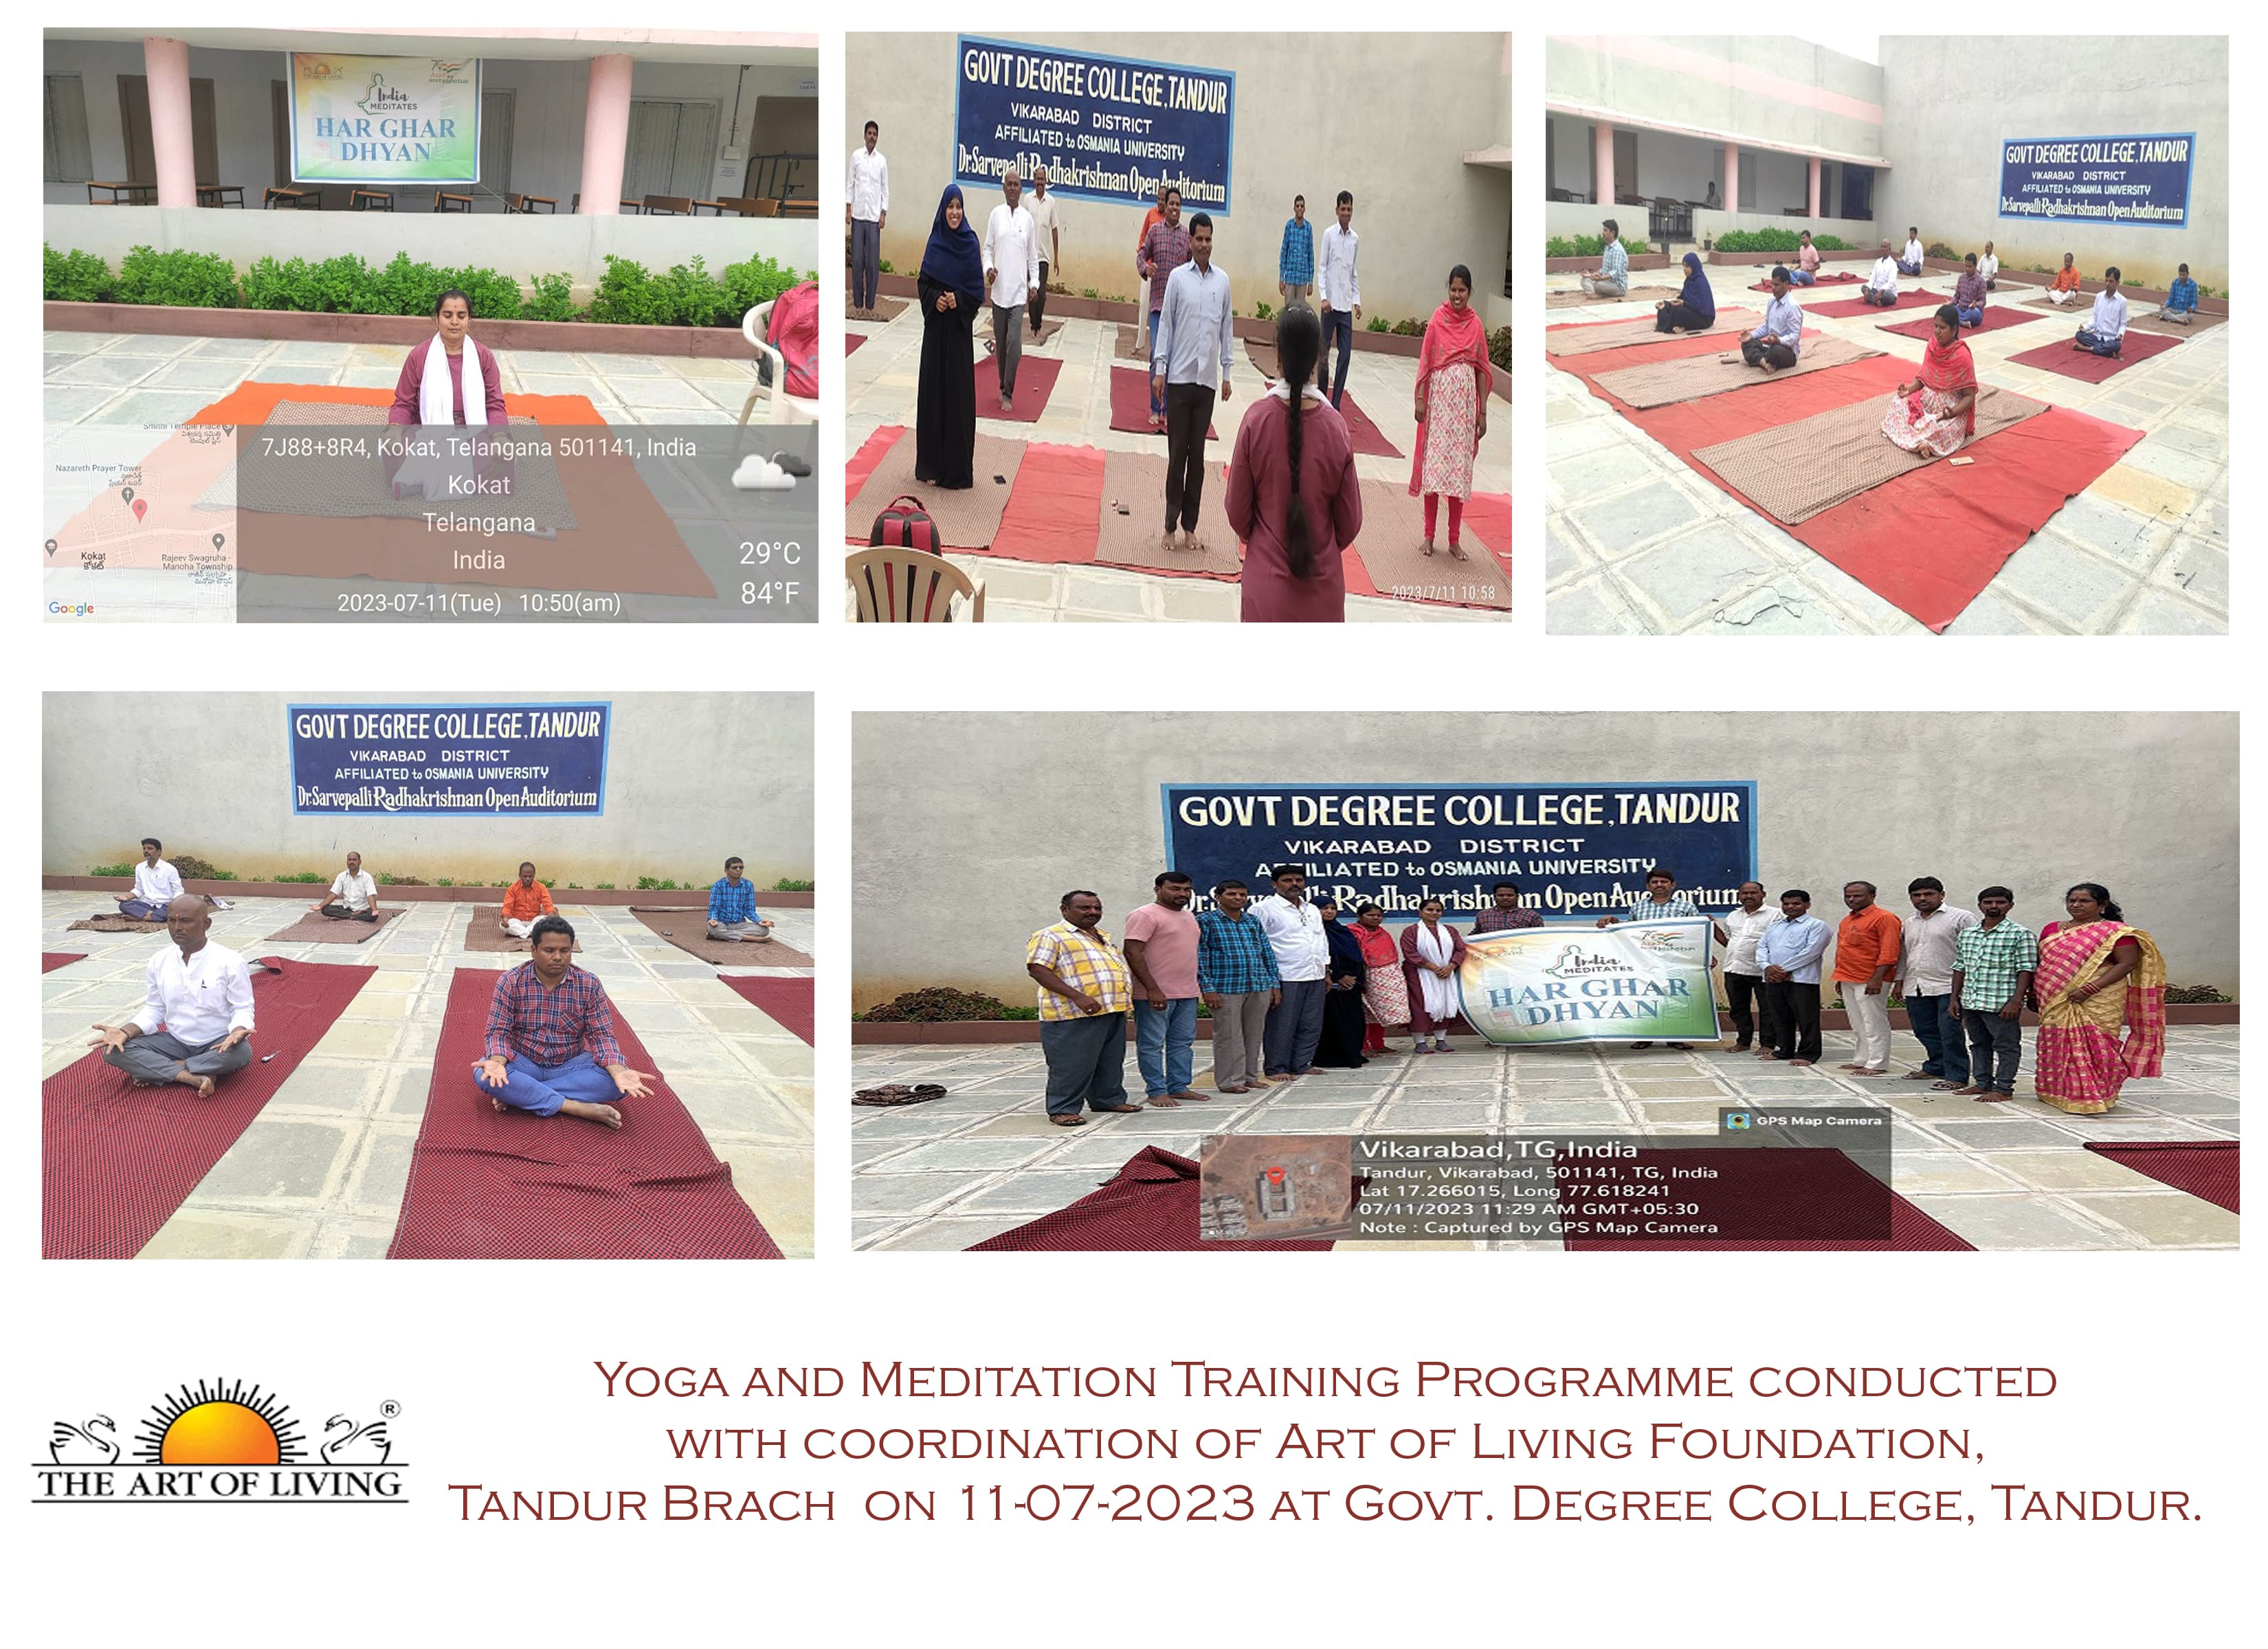 Yoga and Meditation Programme by Art of Living Foundation